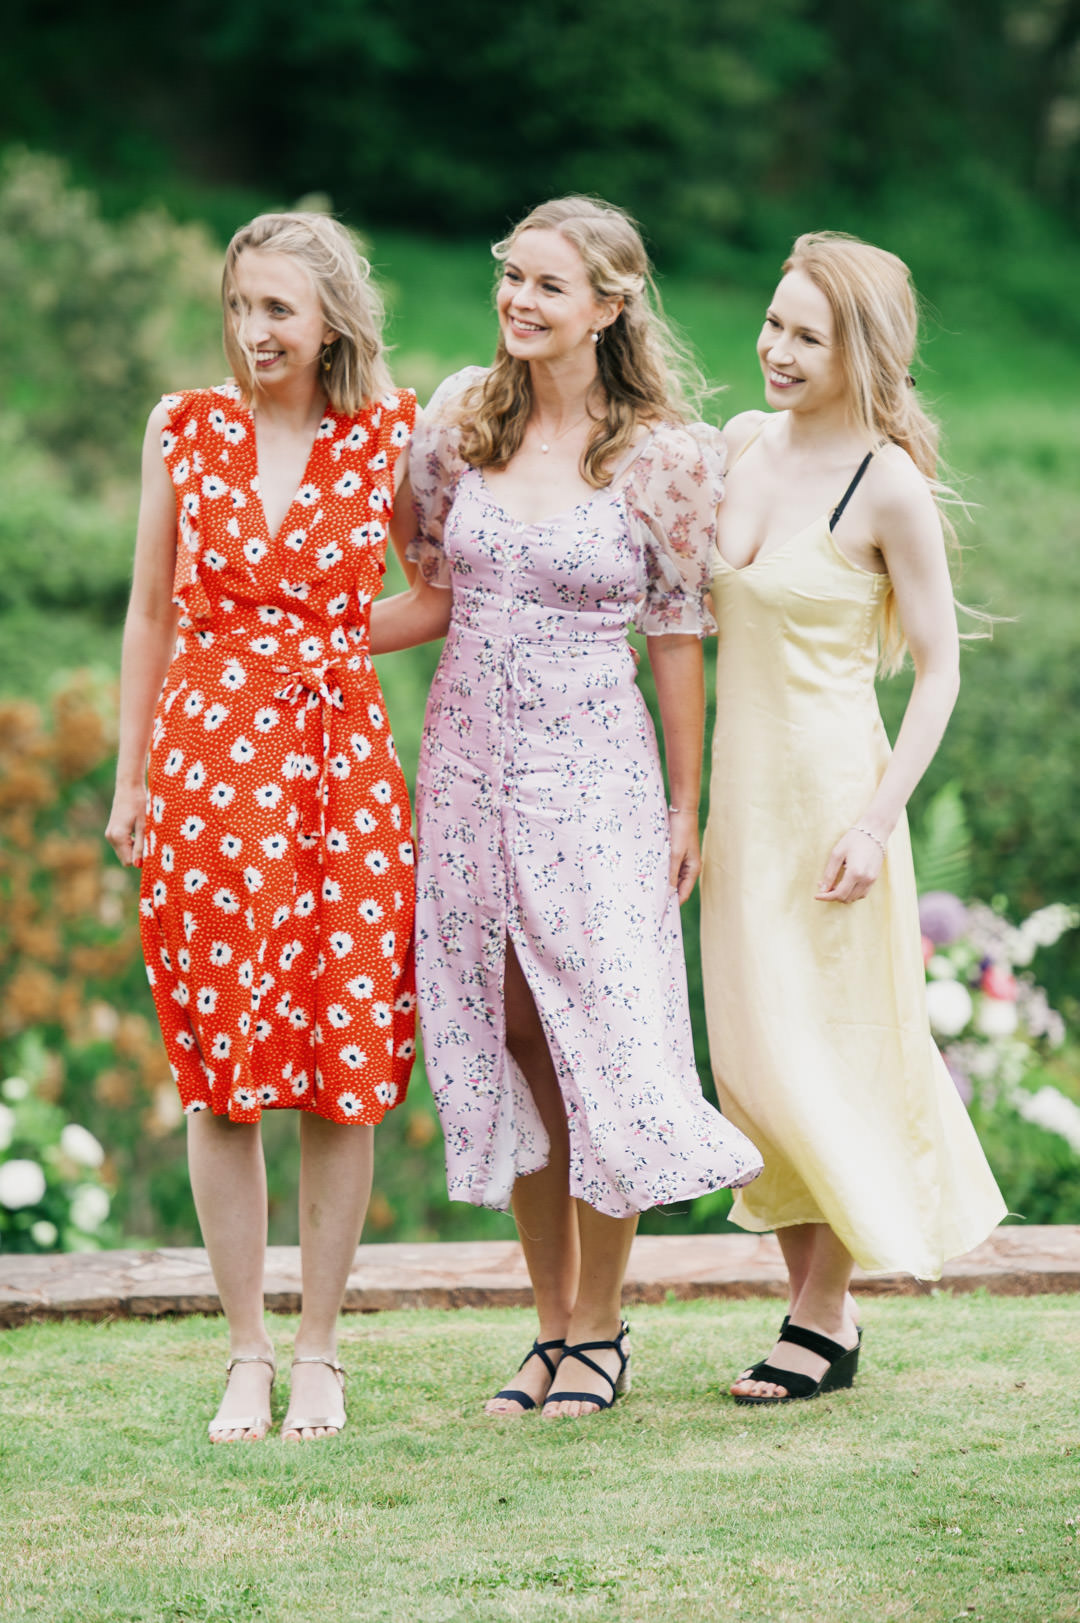 girls in dresses at wedding party in large garden